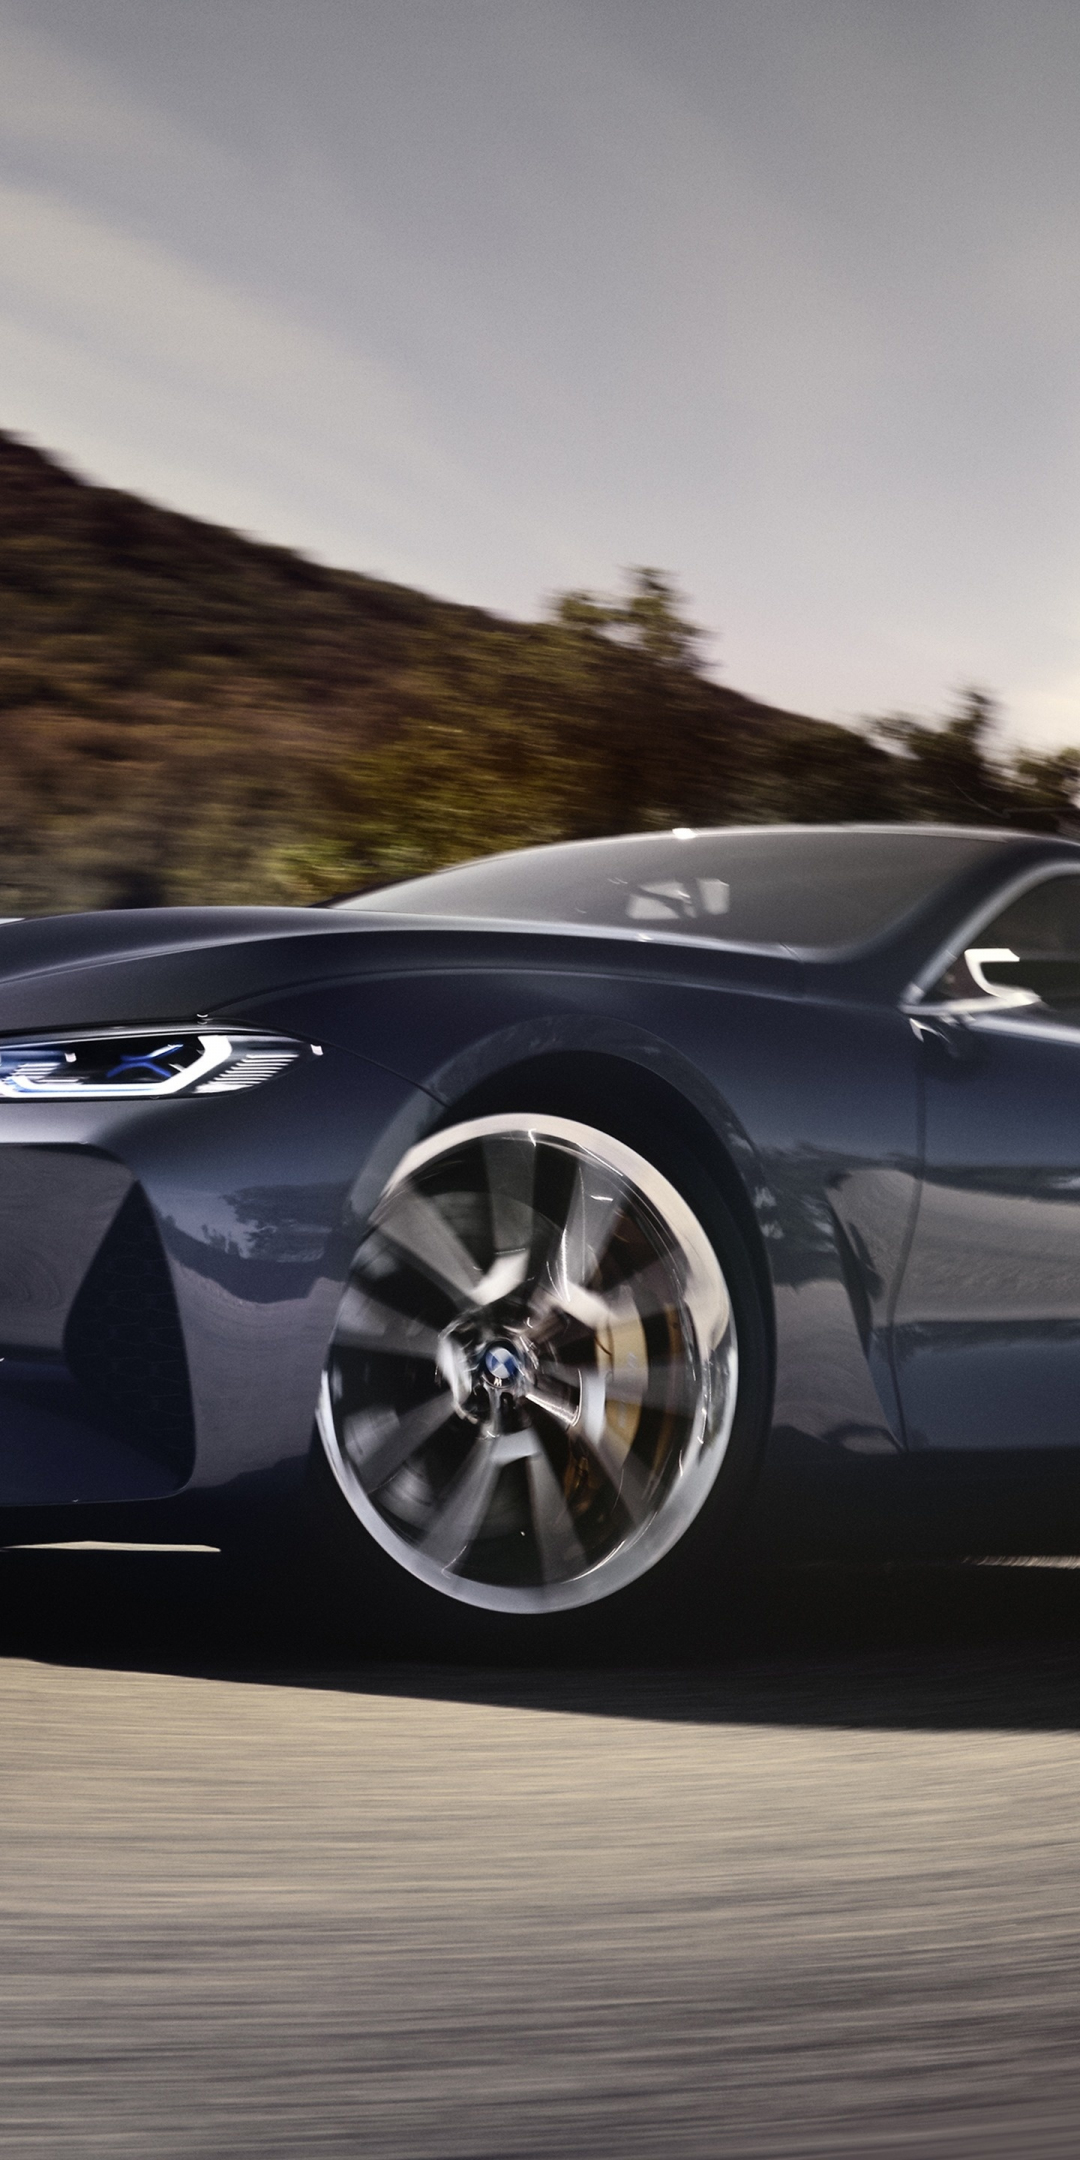 2018, on road, BMW concept 8 series, luxury car, 1080x2160 wallpaper